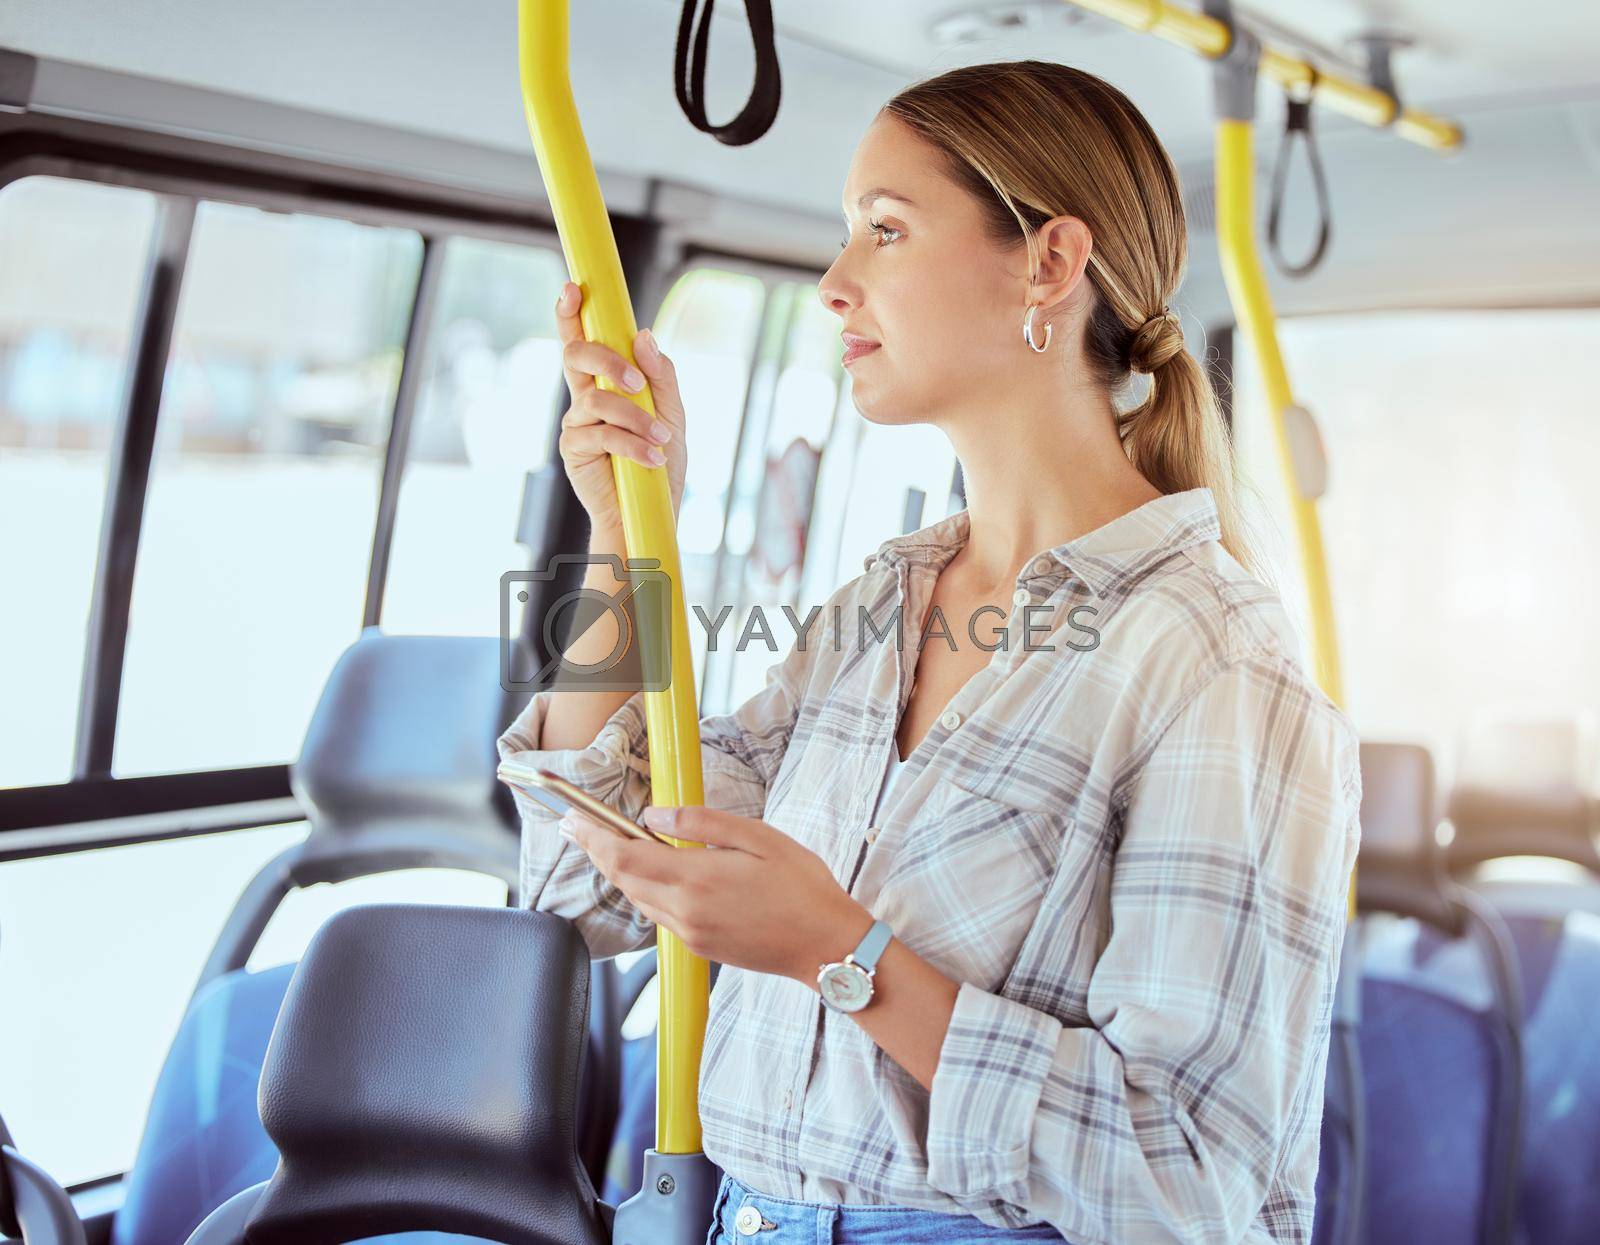 Woman travel with smartphone on bus transportation check social media, website or internet for information about the city. Young person with 5g cellphone on public transport in urban town lens flare.